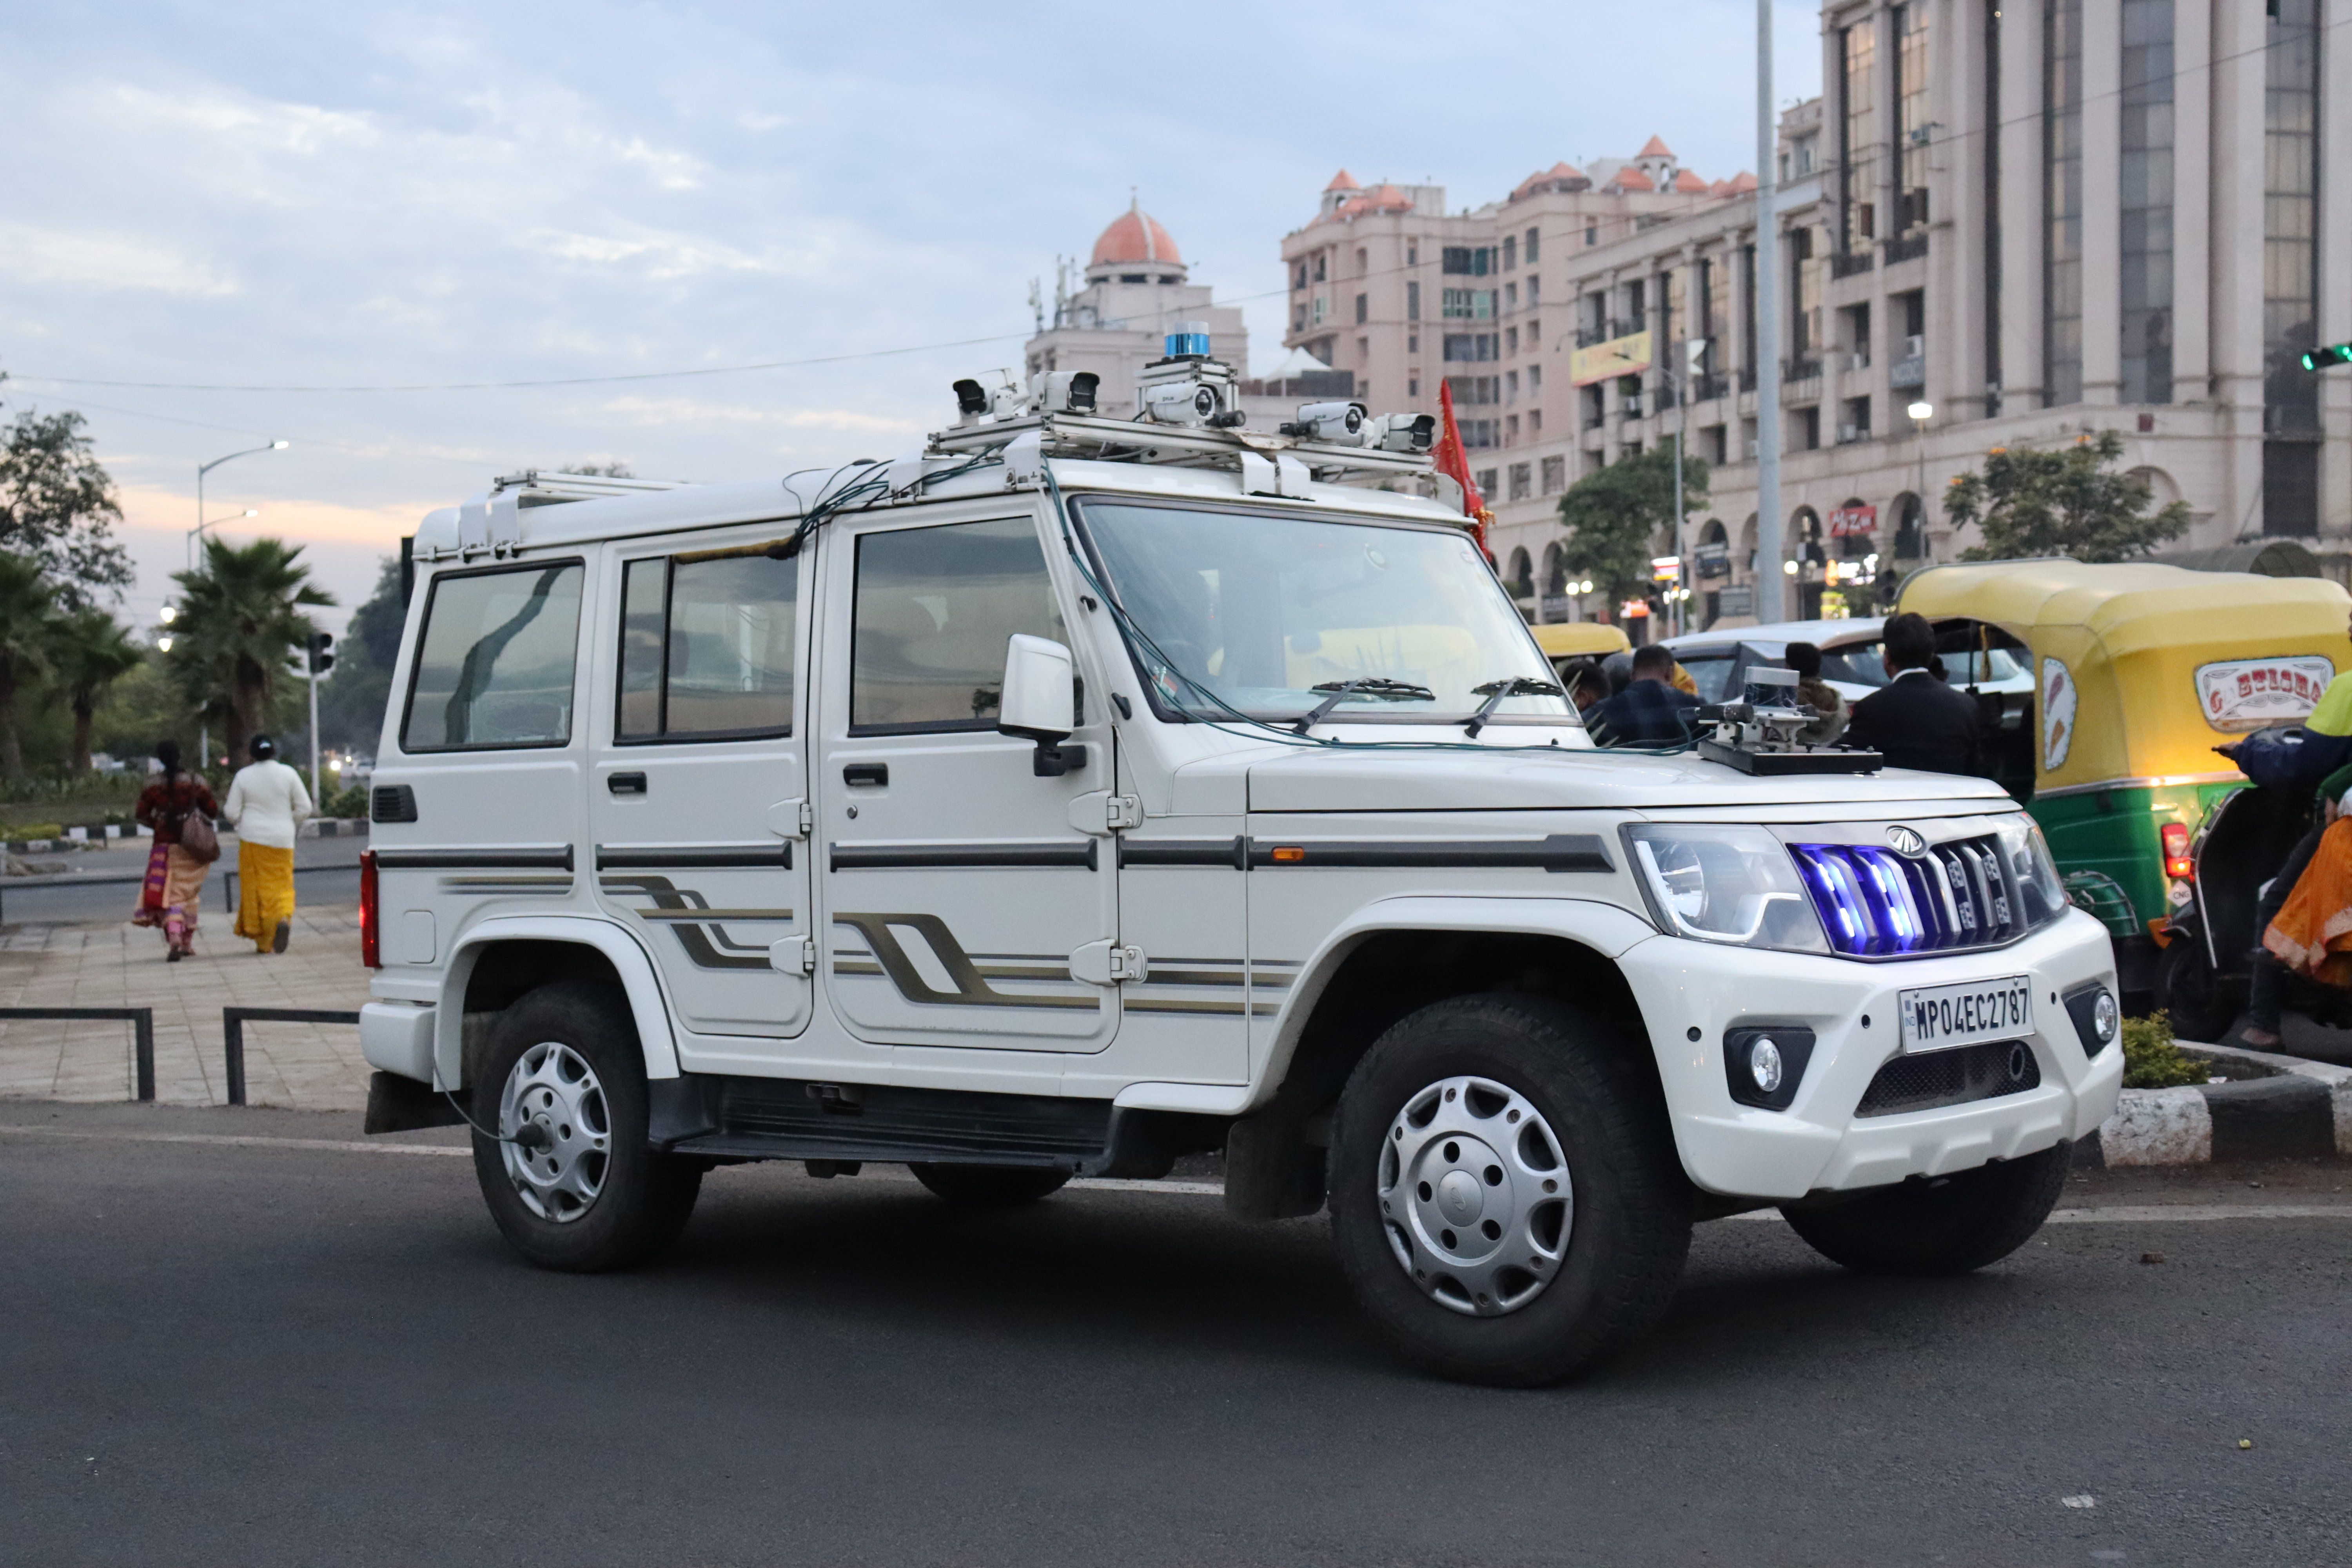 ​Swaayatt Robots SUV with a suite of sensors including lidar and gps on top on a road in India.